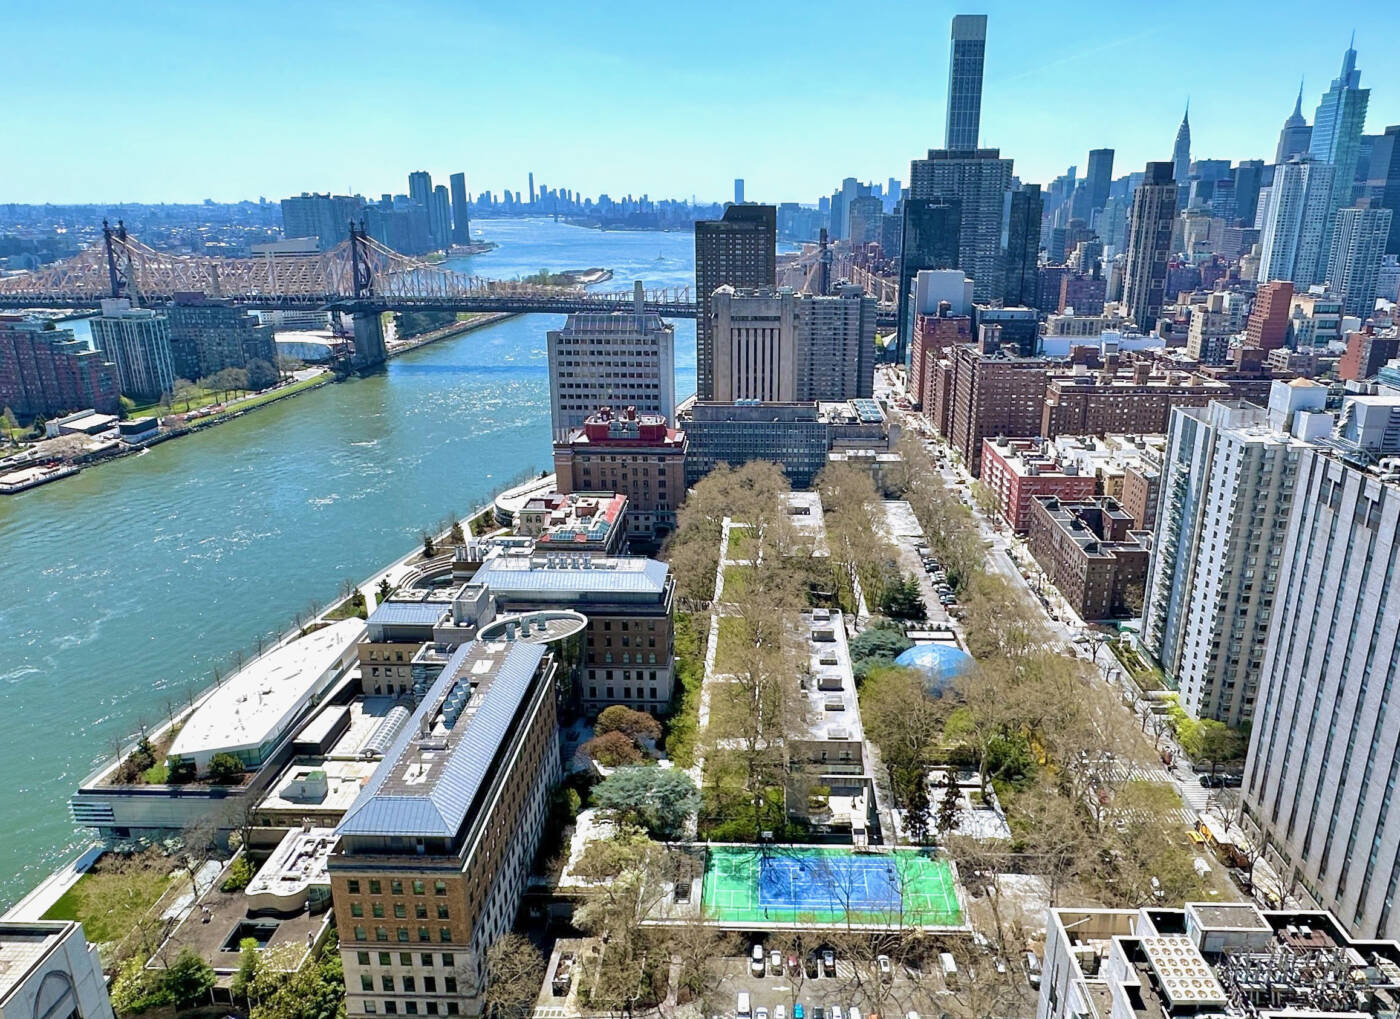 An aerial view of Rockefeller University campus